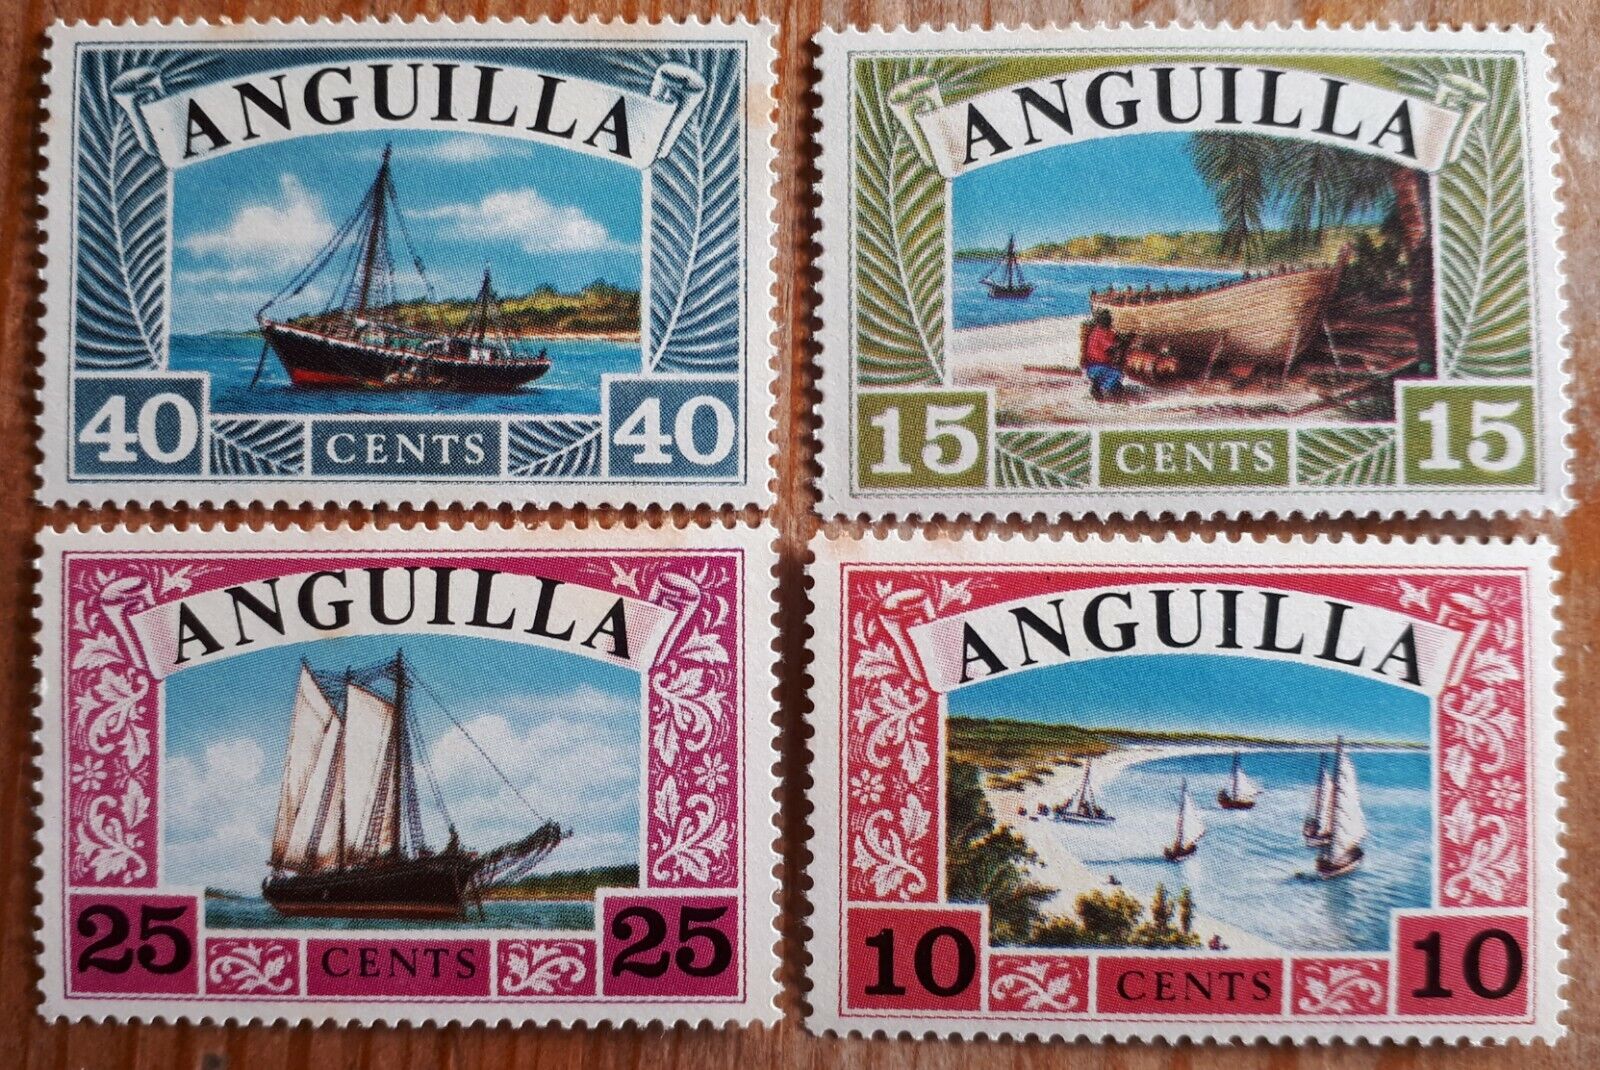 1968 Anguilla Full Set 4 Stamps - Sailboats - Unused/Not Hinged